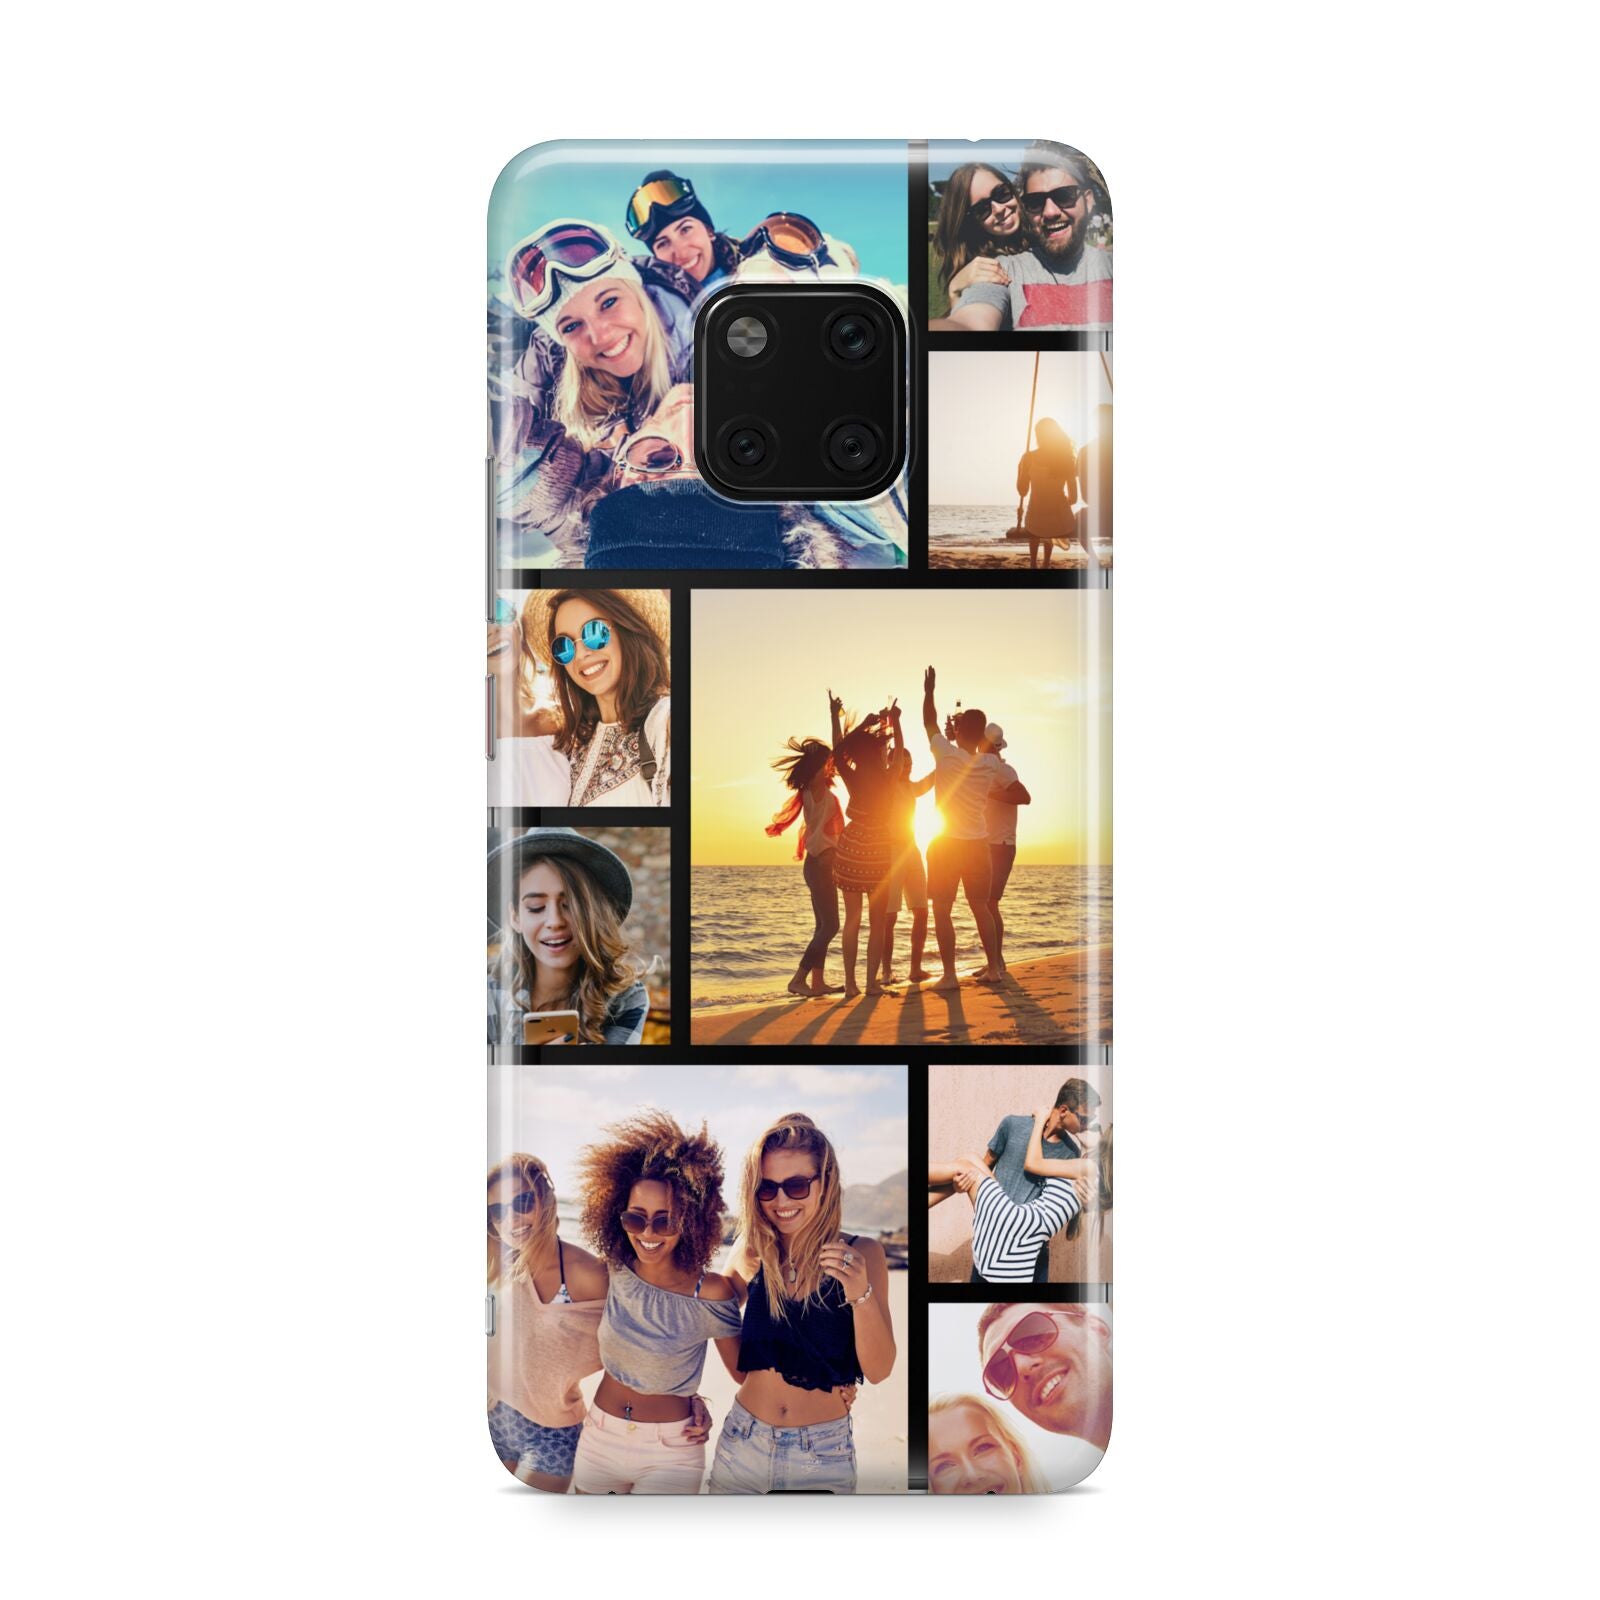 Abstract Photo Collage Upload Huawei Mate 20 Pro Phone Case